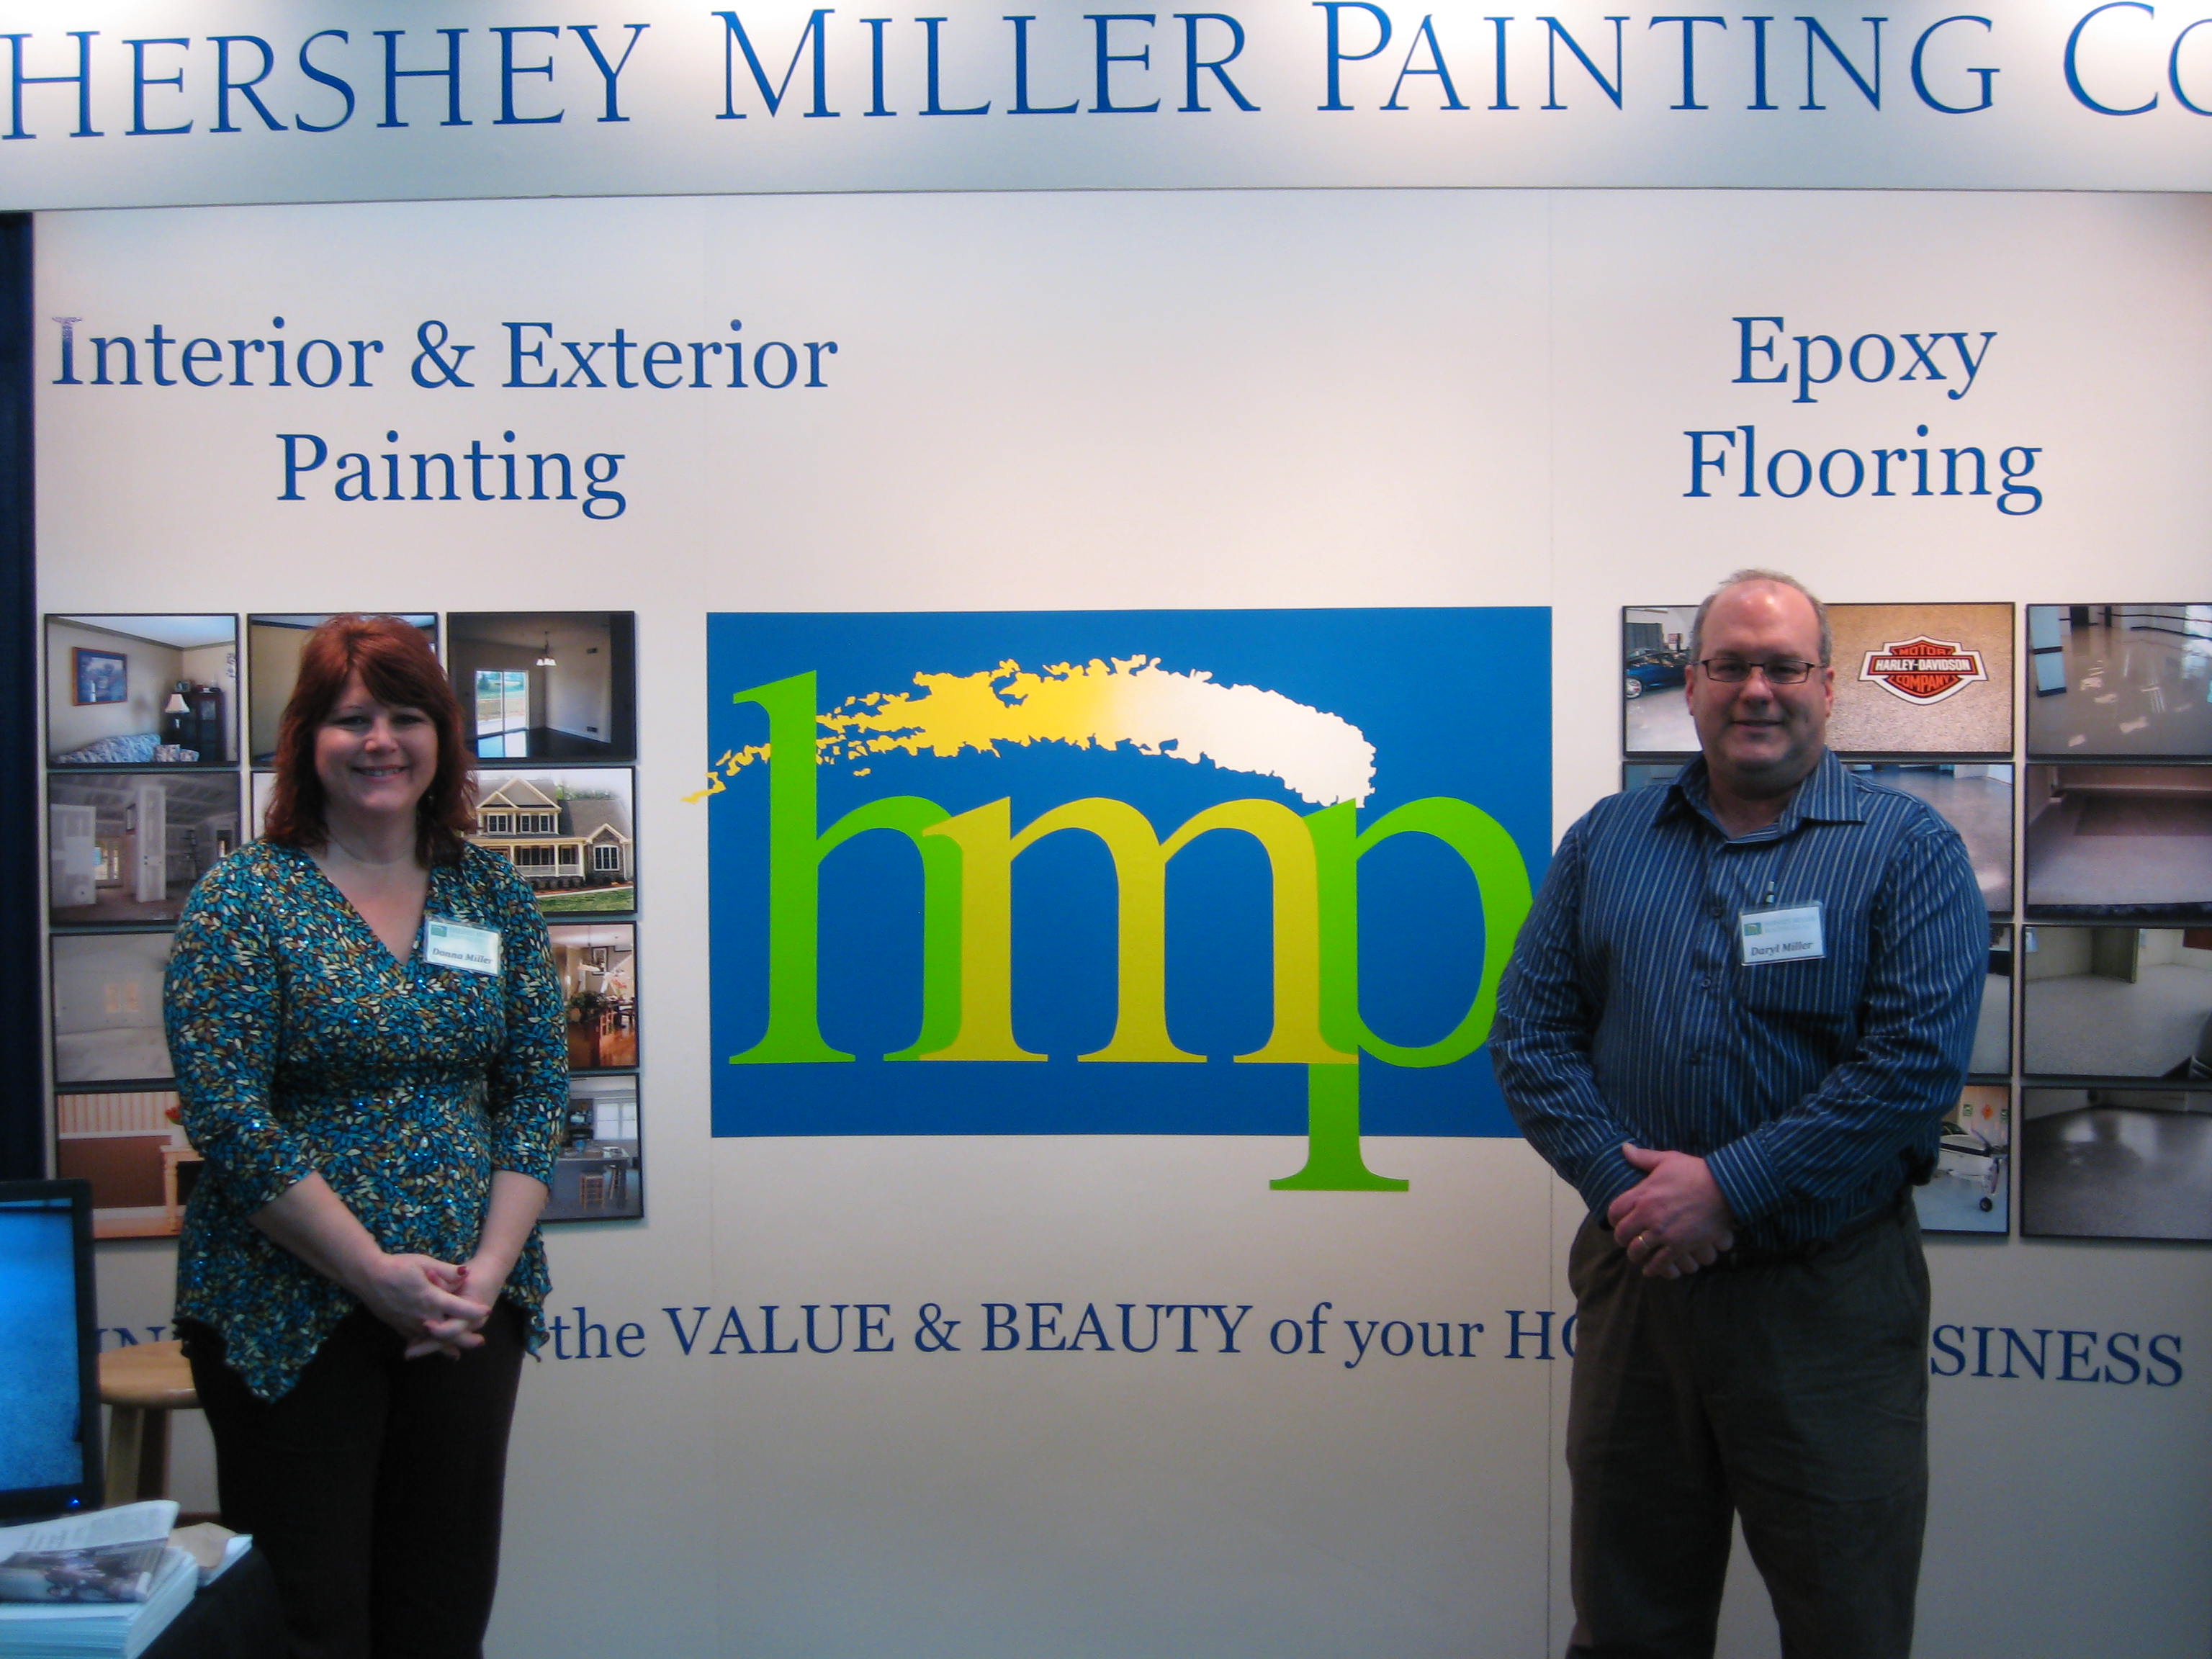 The Owners of Hershey Miller Painting Co